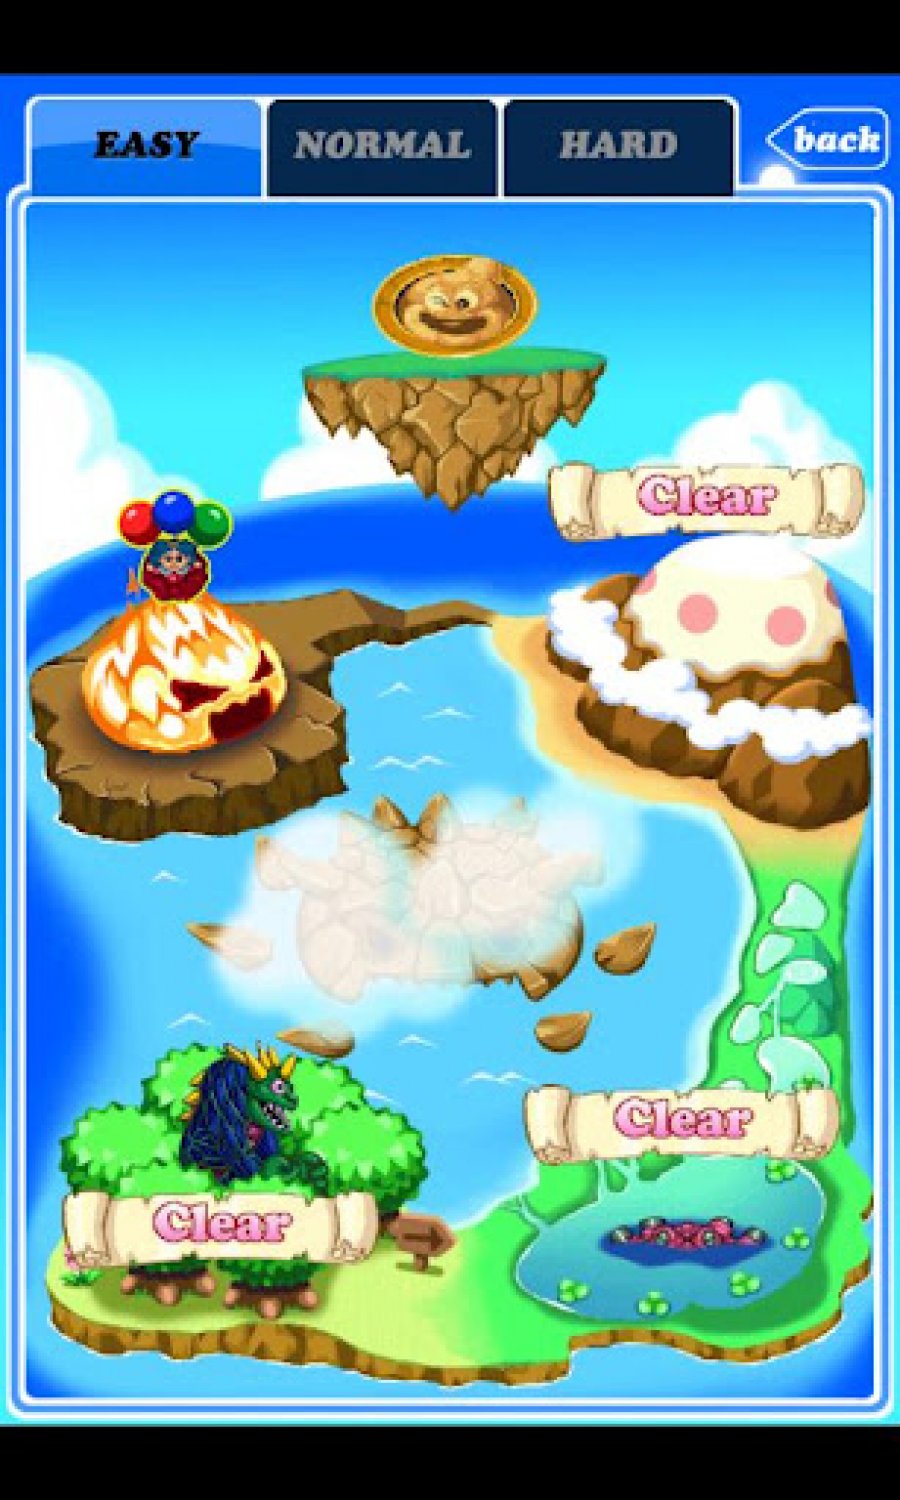 snow bros 2 download for android